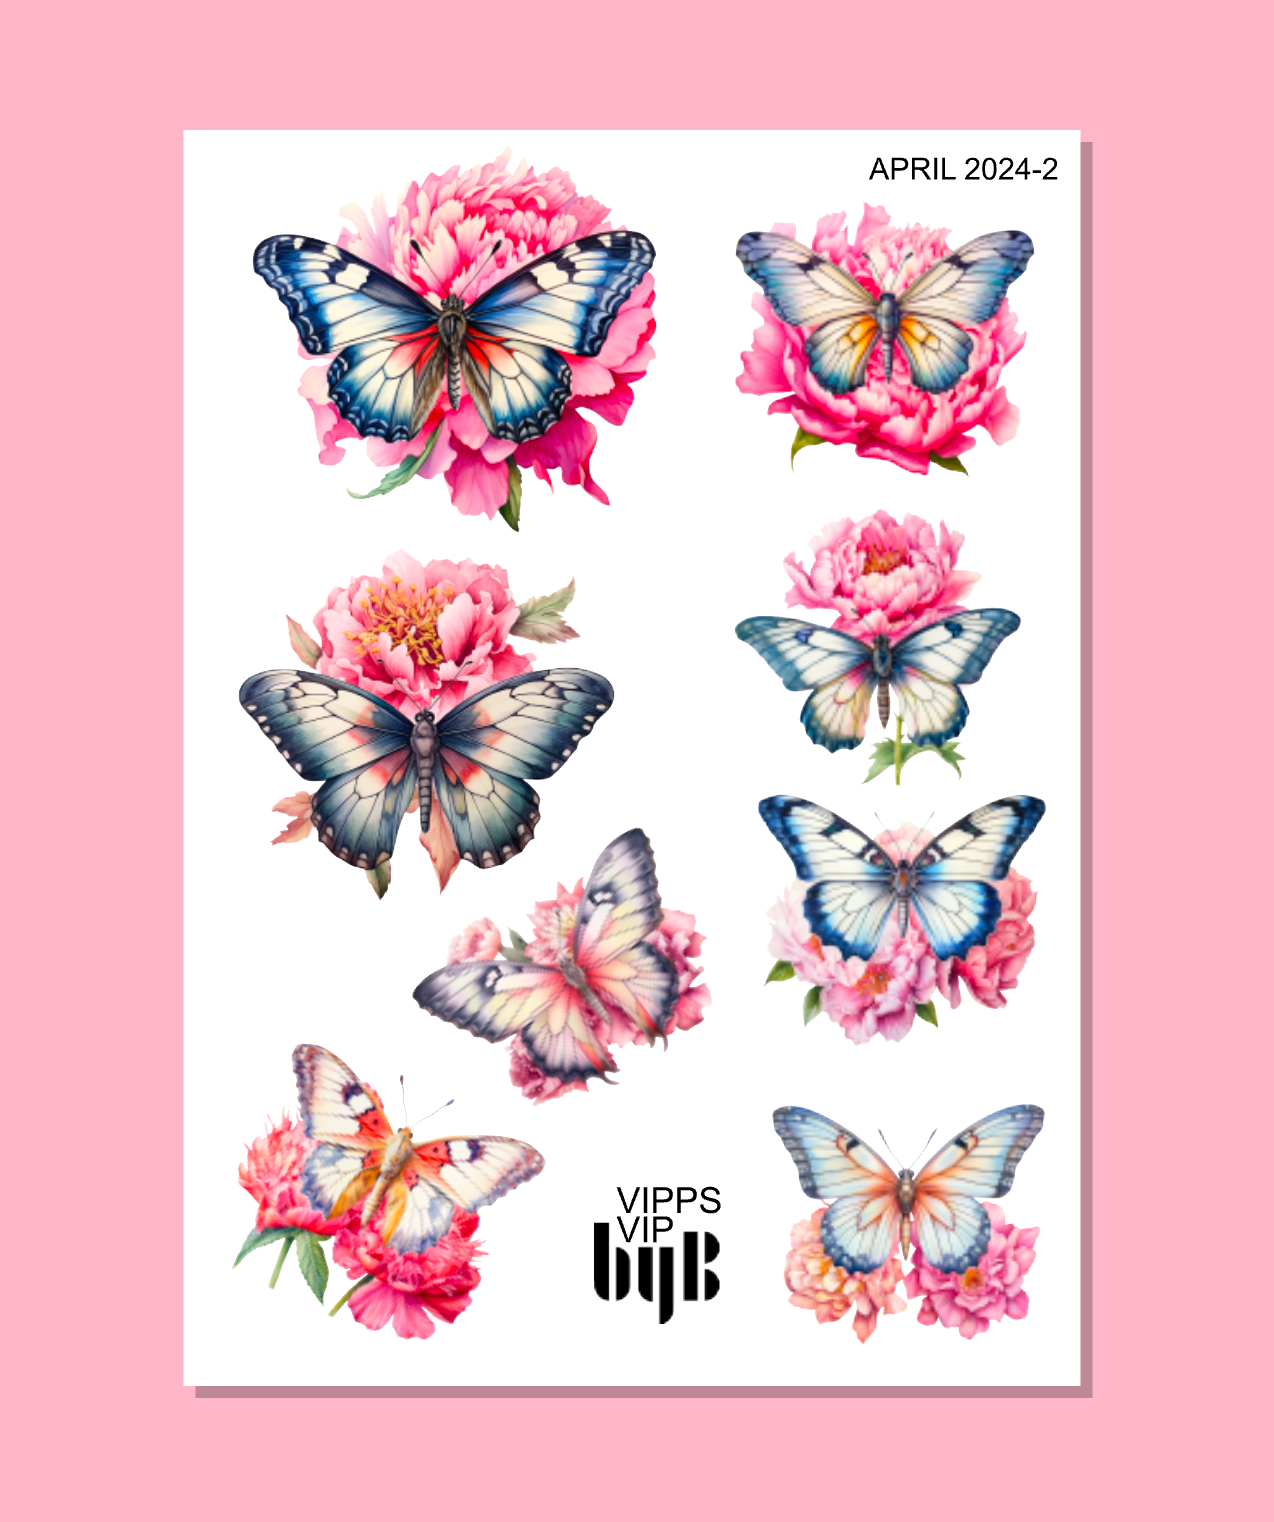 VIPPS VIP APRIL 2024 (also in XS)